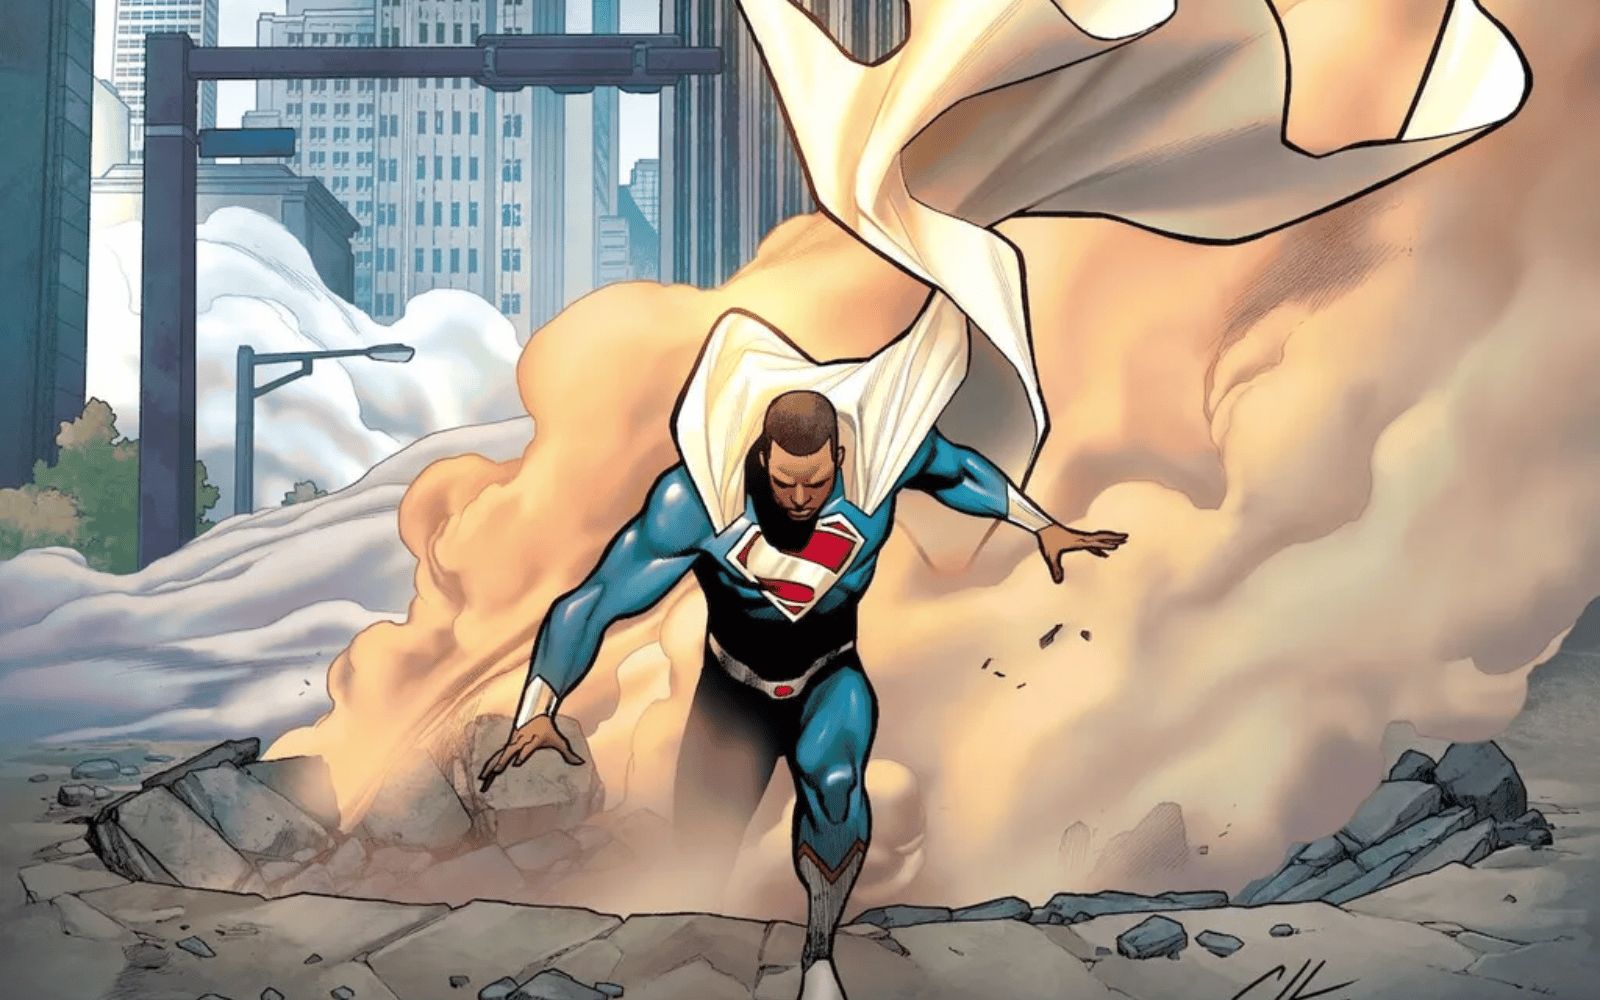 Earth-2's Ultraman, who will face Superman in the new comic.